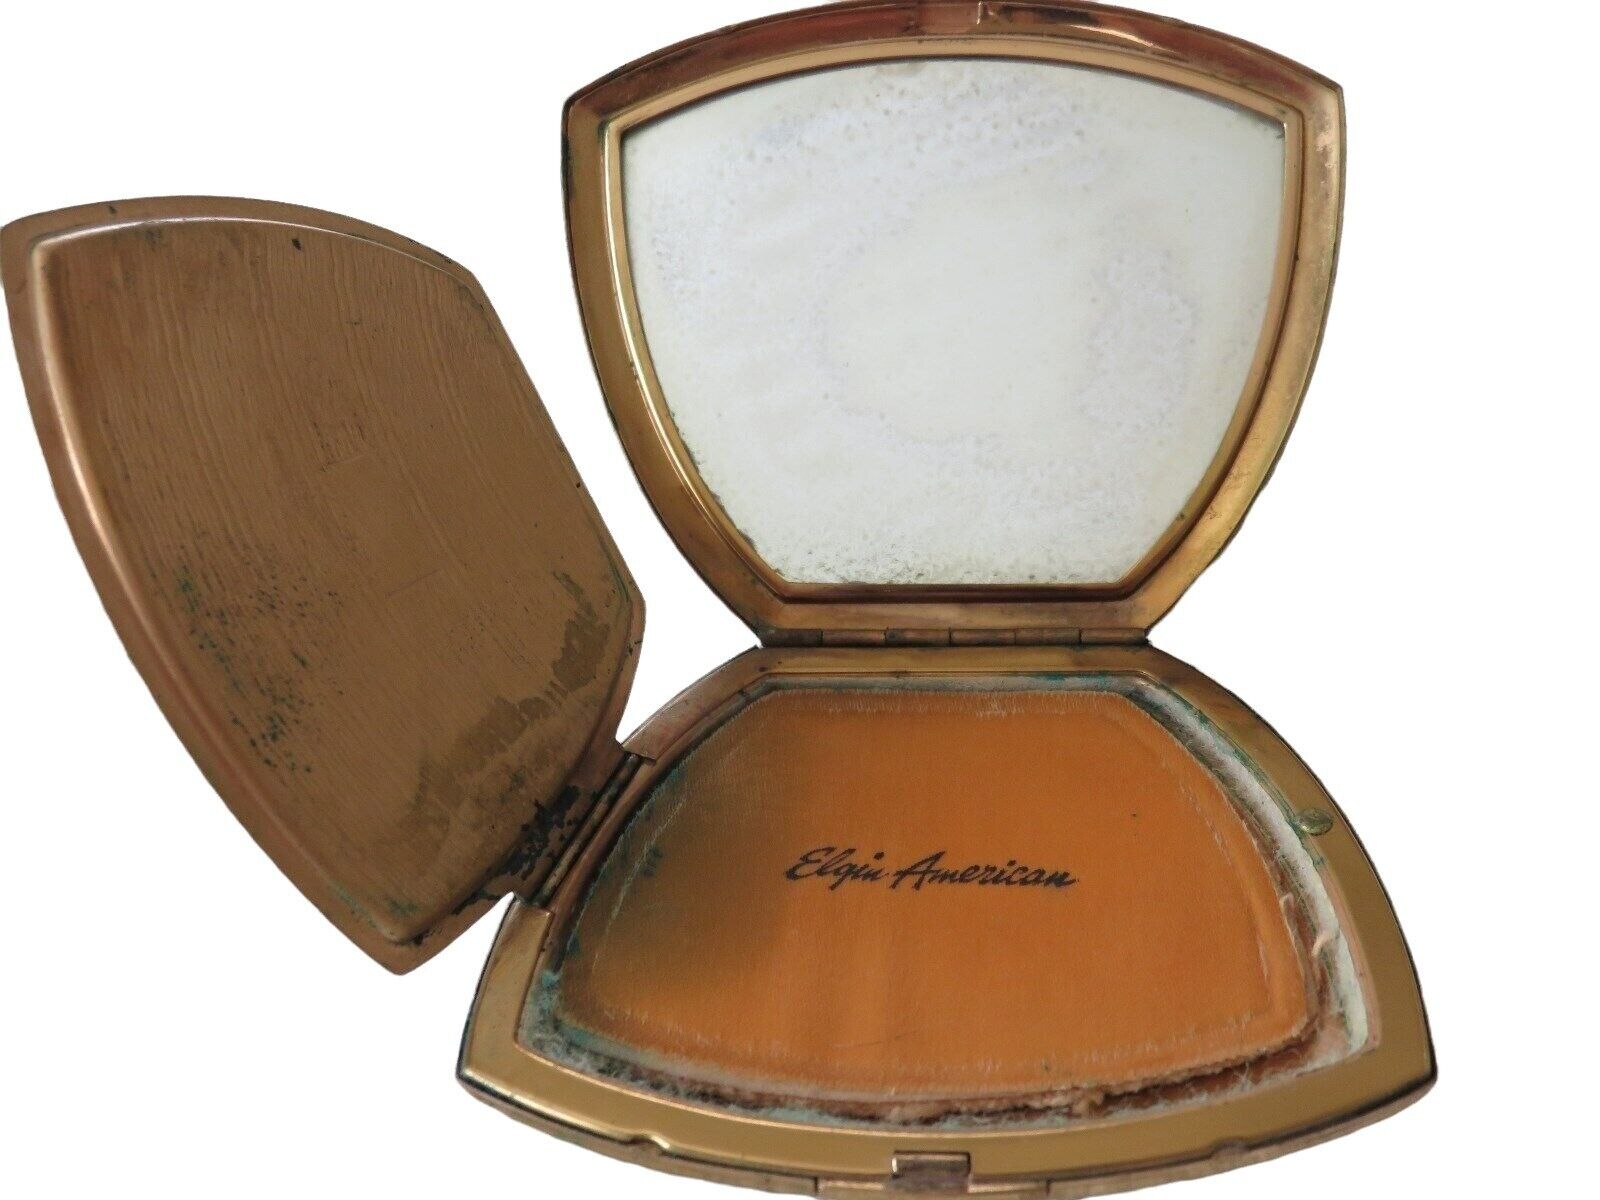 Vintage Clamshell Powder Puff Compact Elgin American Beauty Gold Tone USA